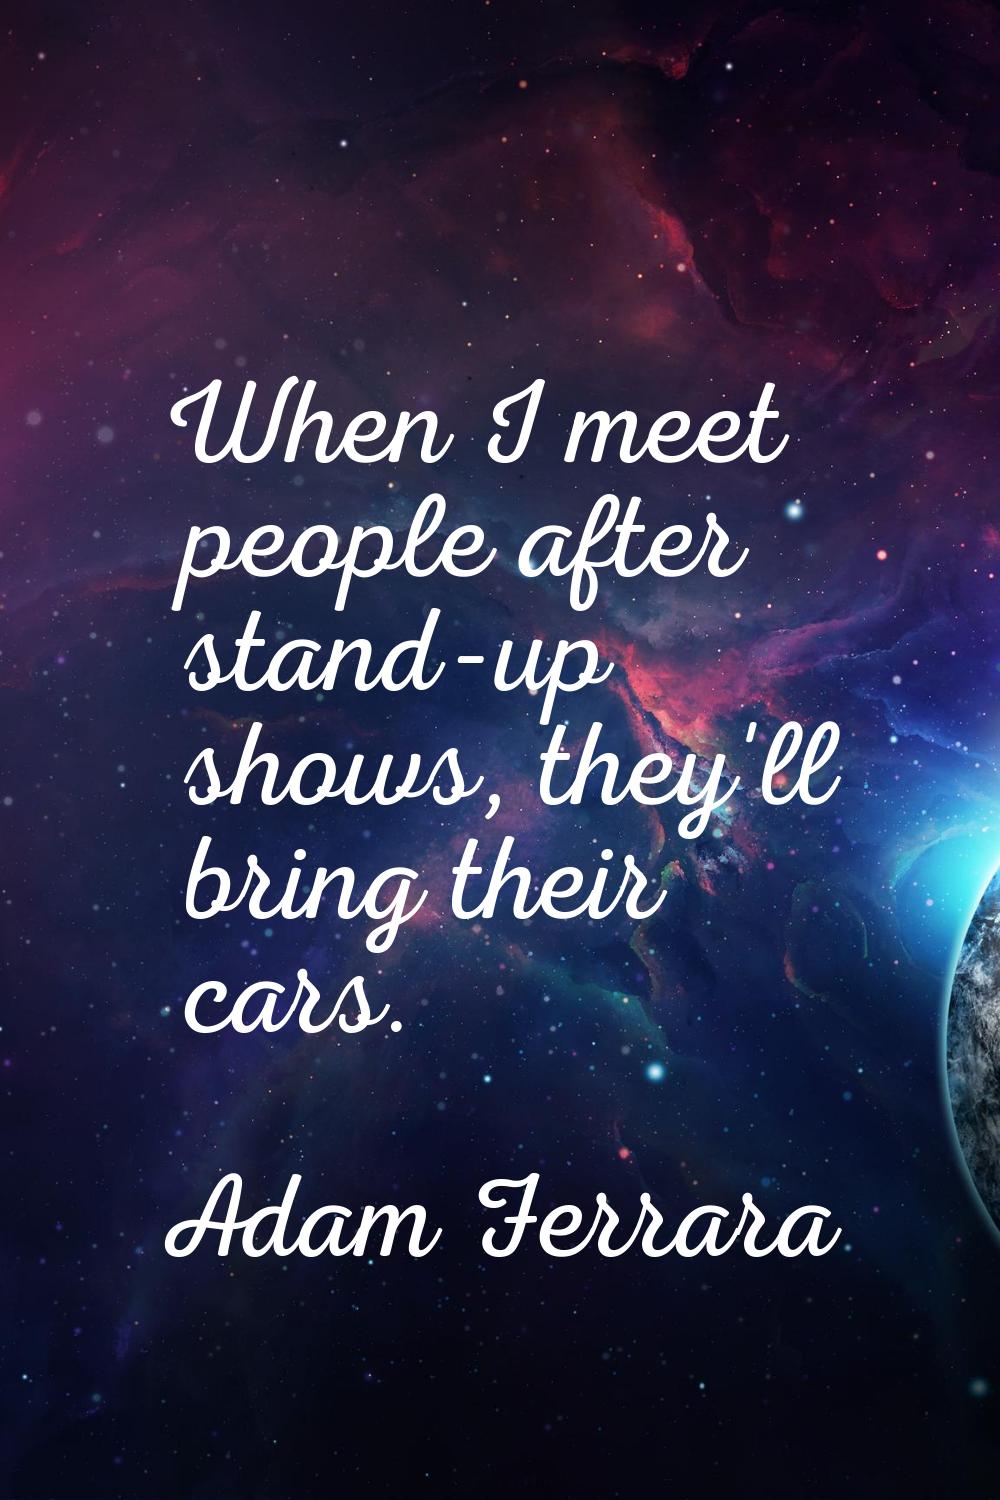 When I meet people after stand-up shows, they'll bring their cars.